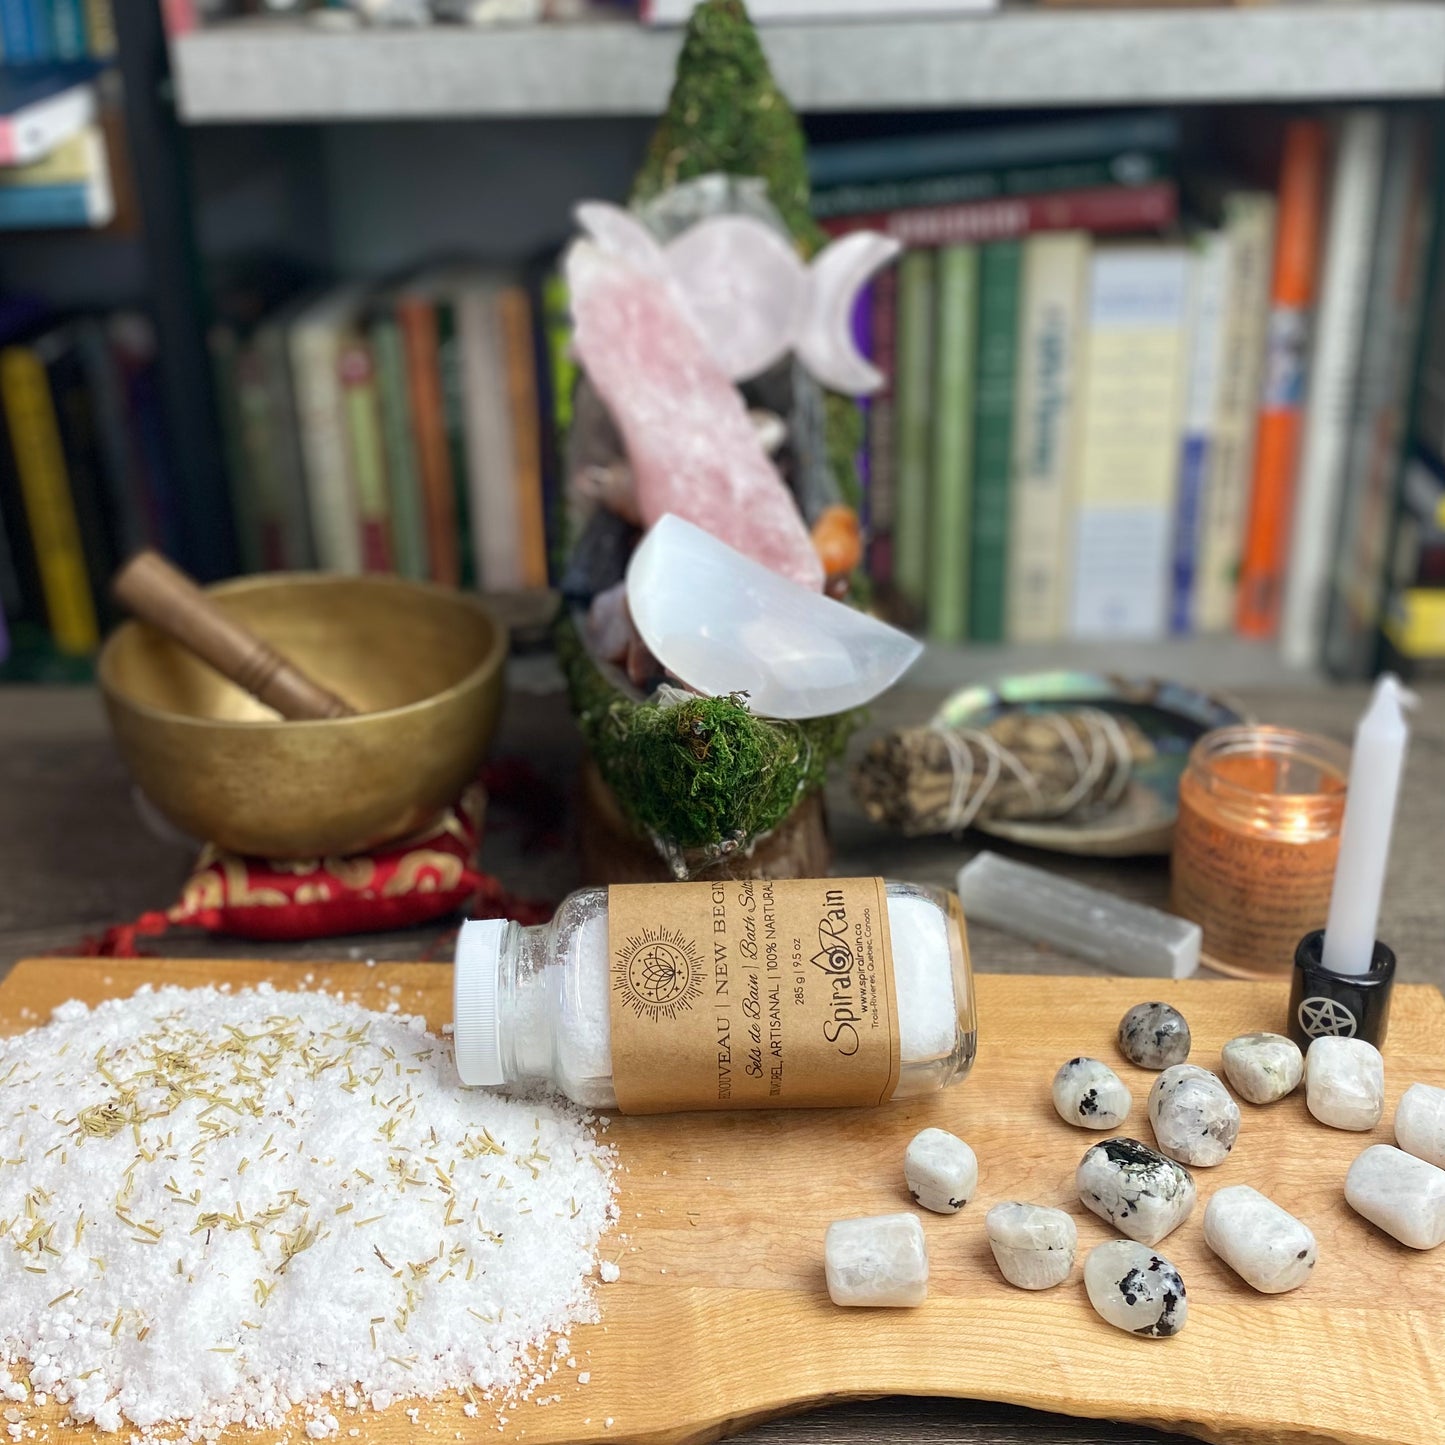 New Beginnings bath salts at $20 only from Spiral Rain